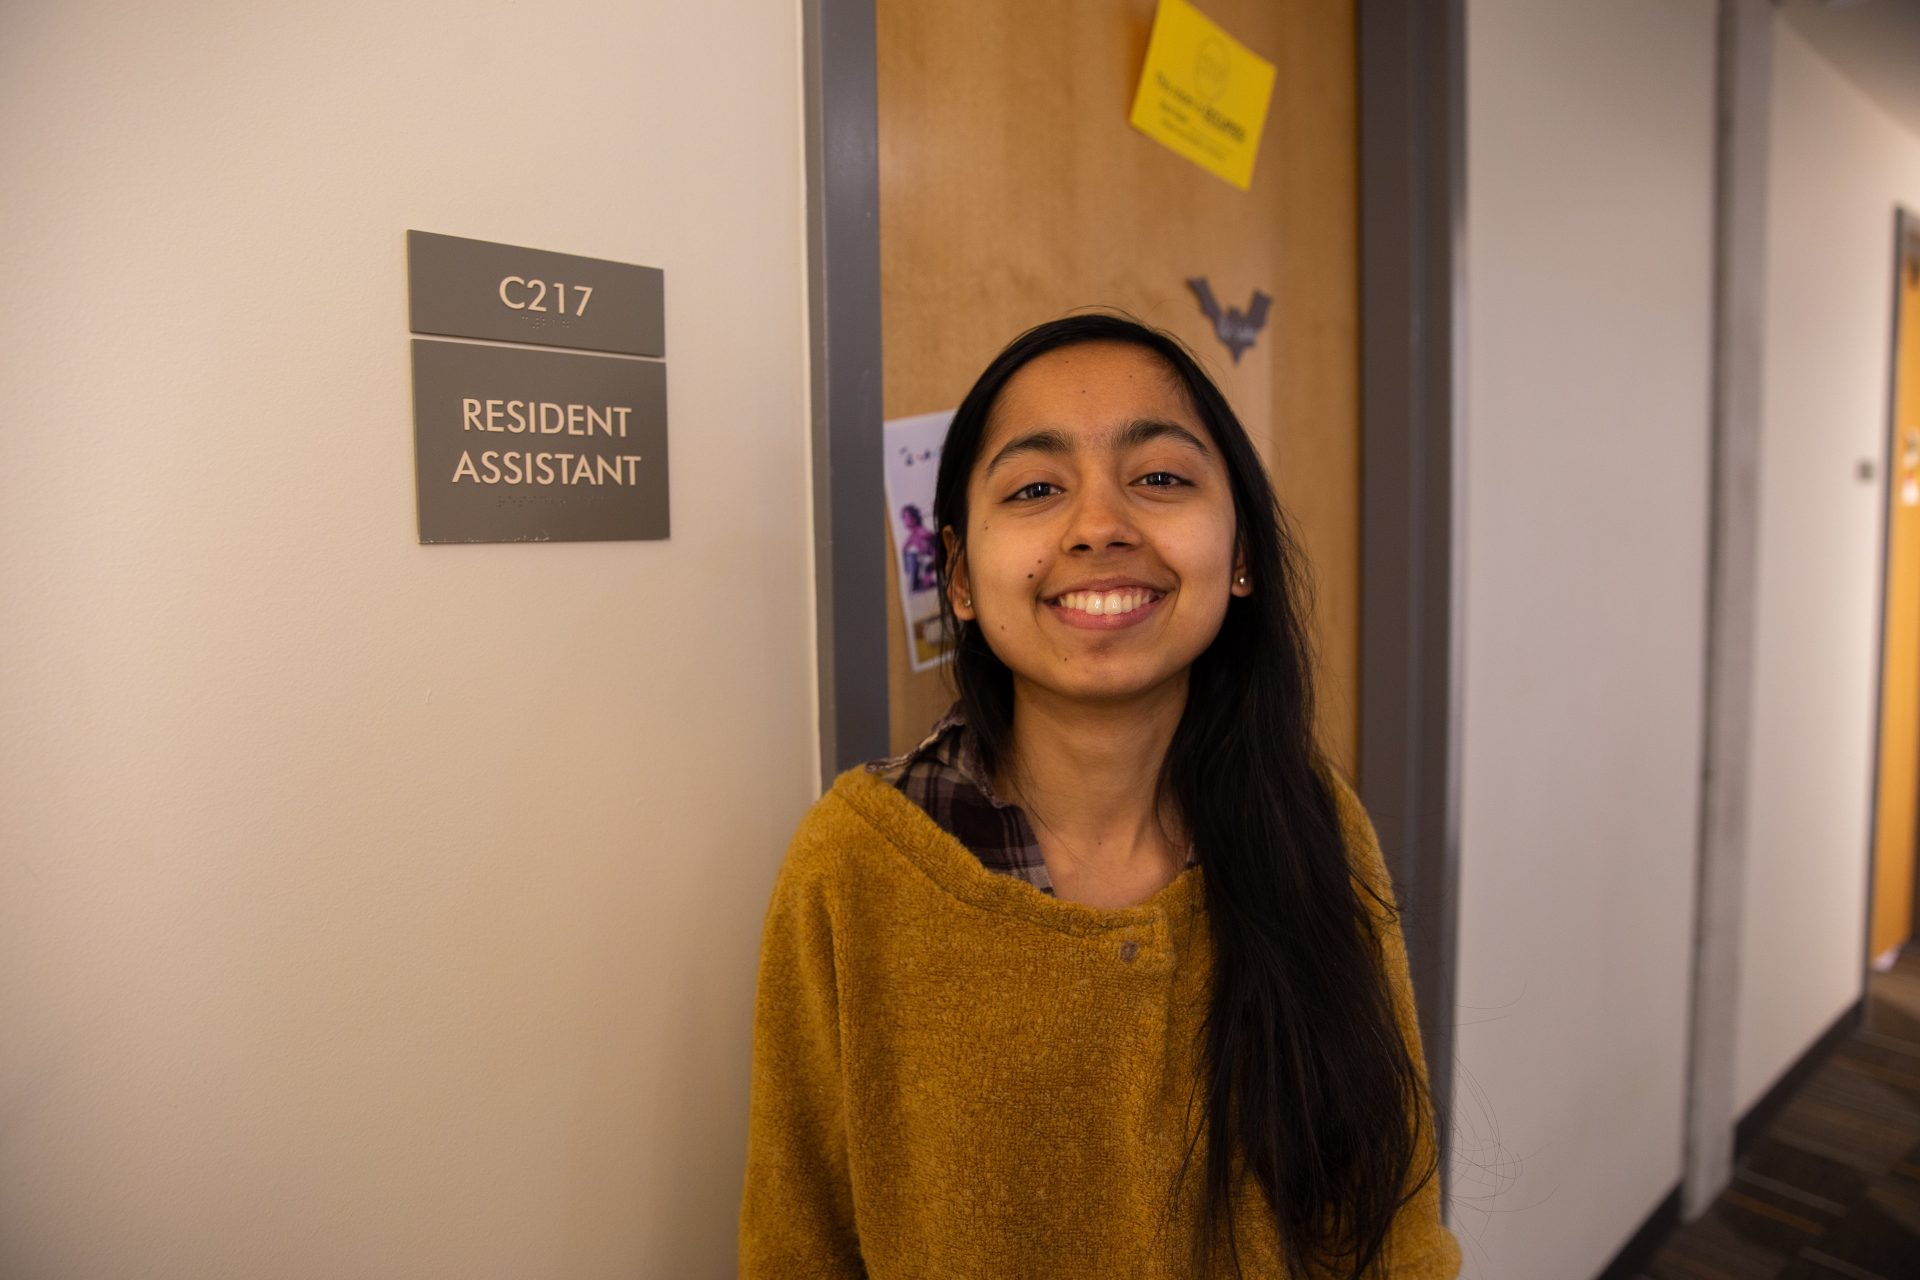 Gatha Adhikari posing in front of her Resident Assistant sign in Holly Pointe Commons.